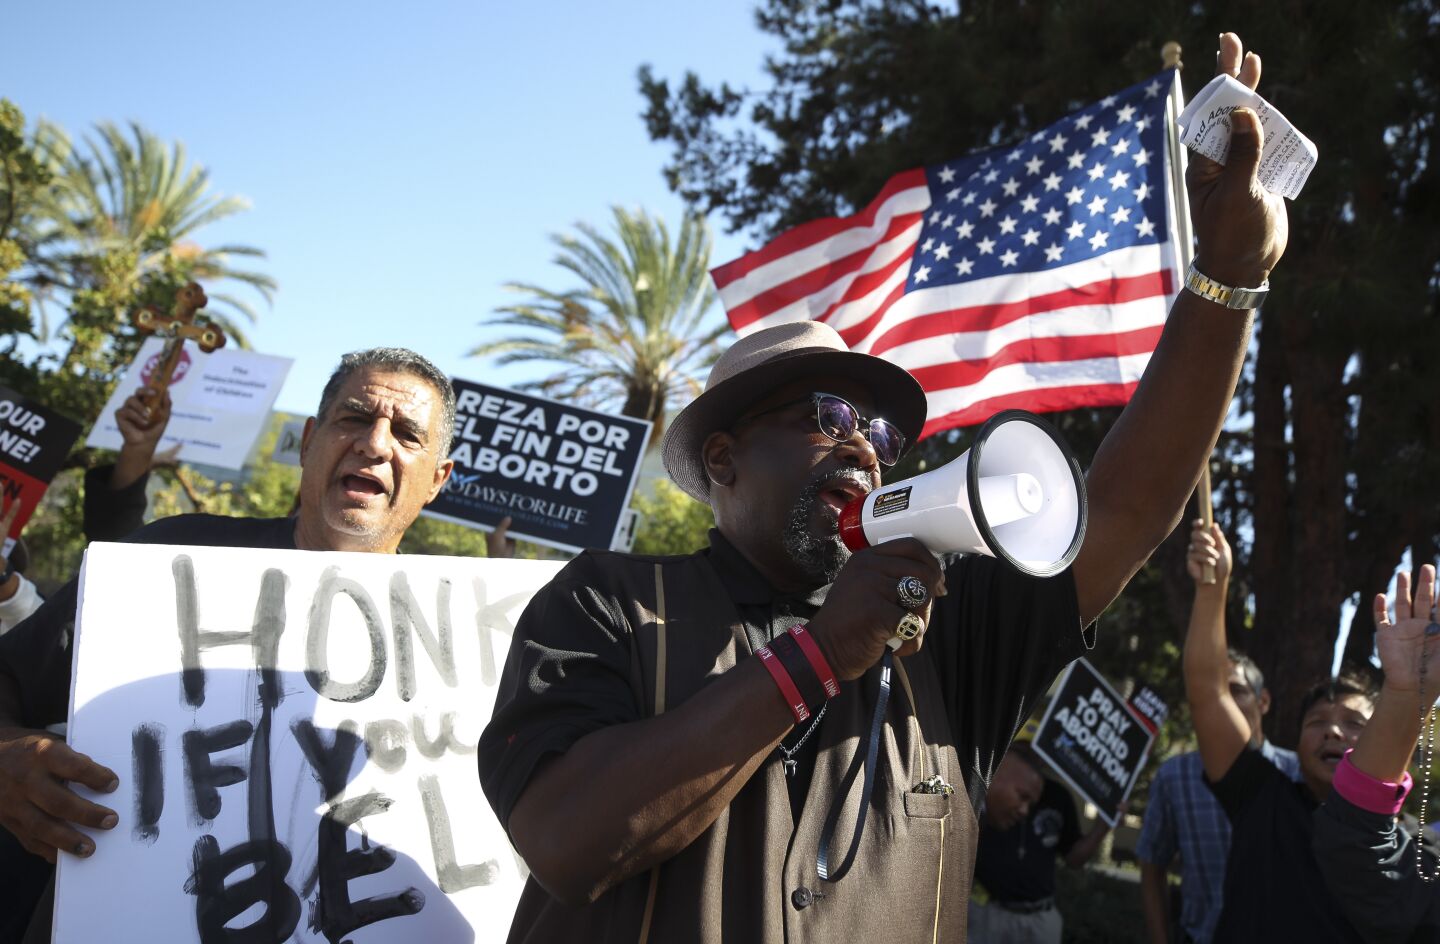 Dennis Hodges, a pastor with The Church of Yeshua, uses a loudspeaker to sing "Hallelujah" as he and protesters against the Drag Queen Story Hour demonstrate at the Chula Vista Public Library, Civic Center Branch, on Tuesday, September 10, 2019 in Chula Vista, California.